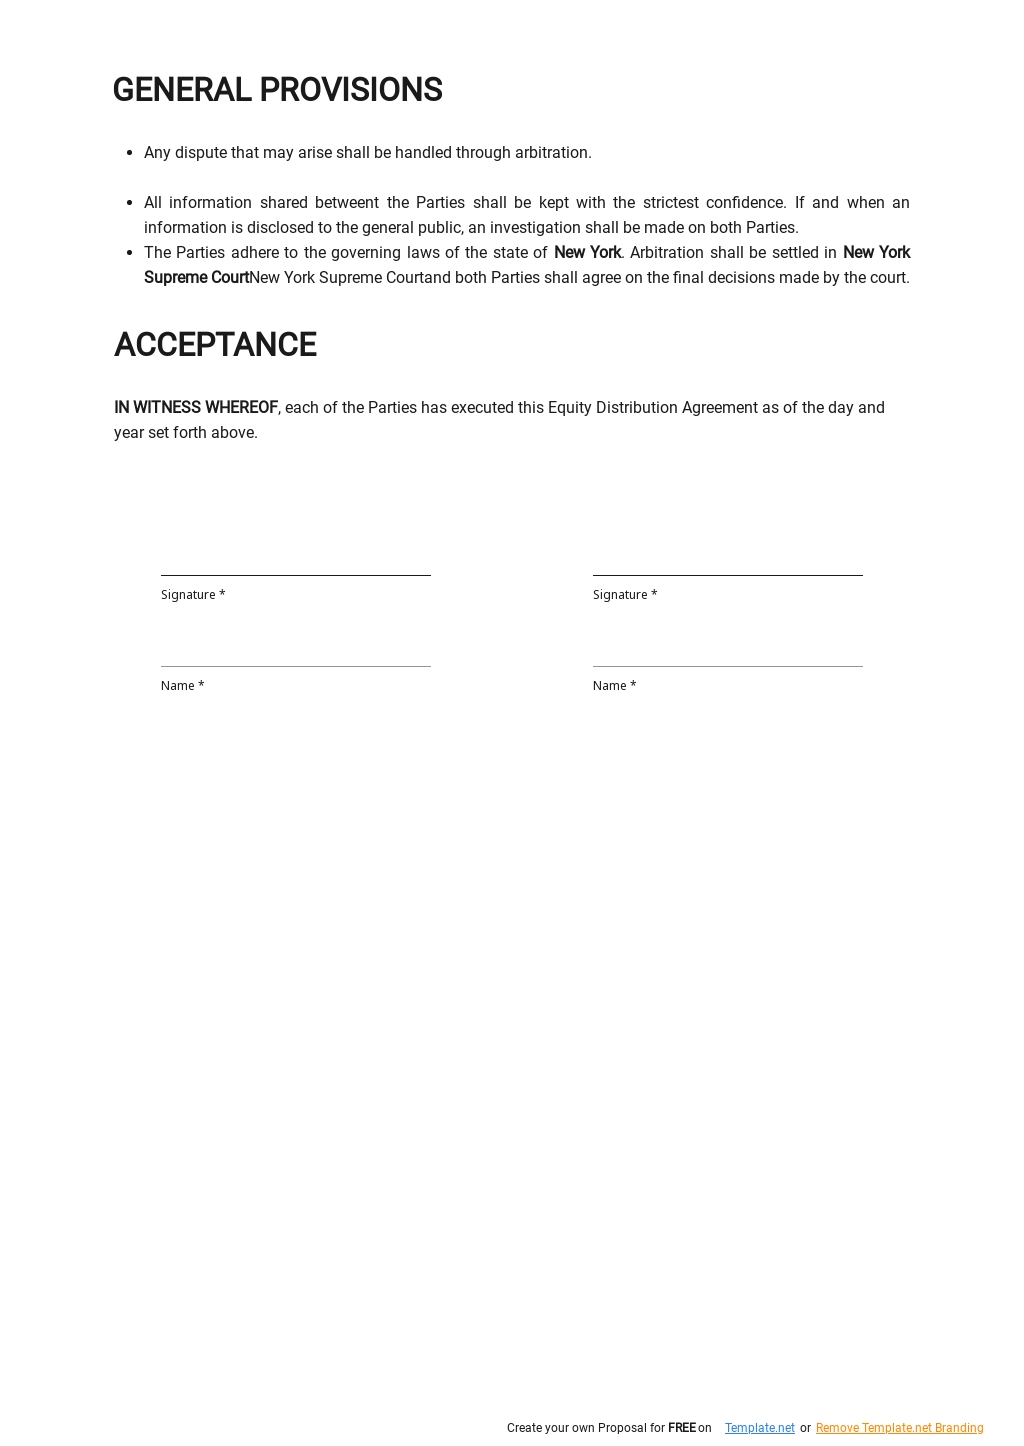 Equity Distribution Agreement Template 2.jpe